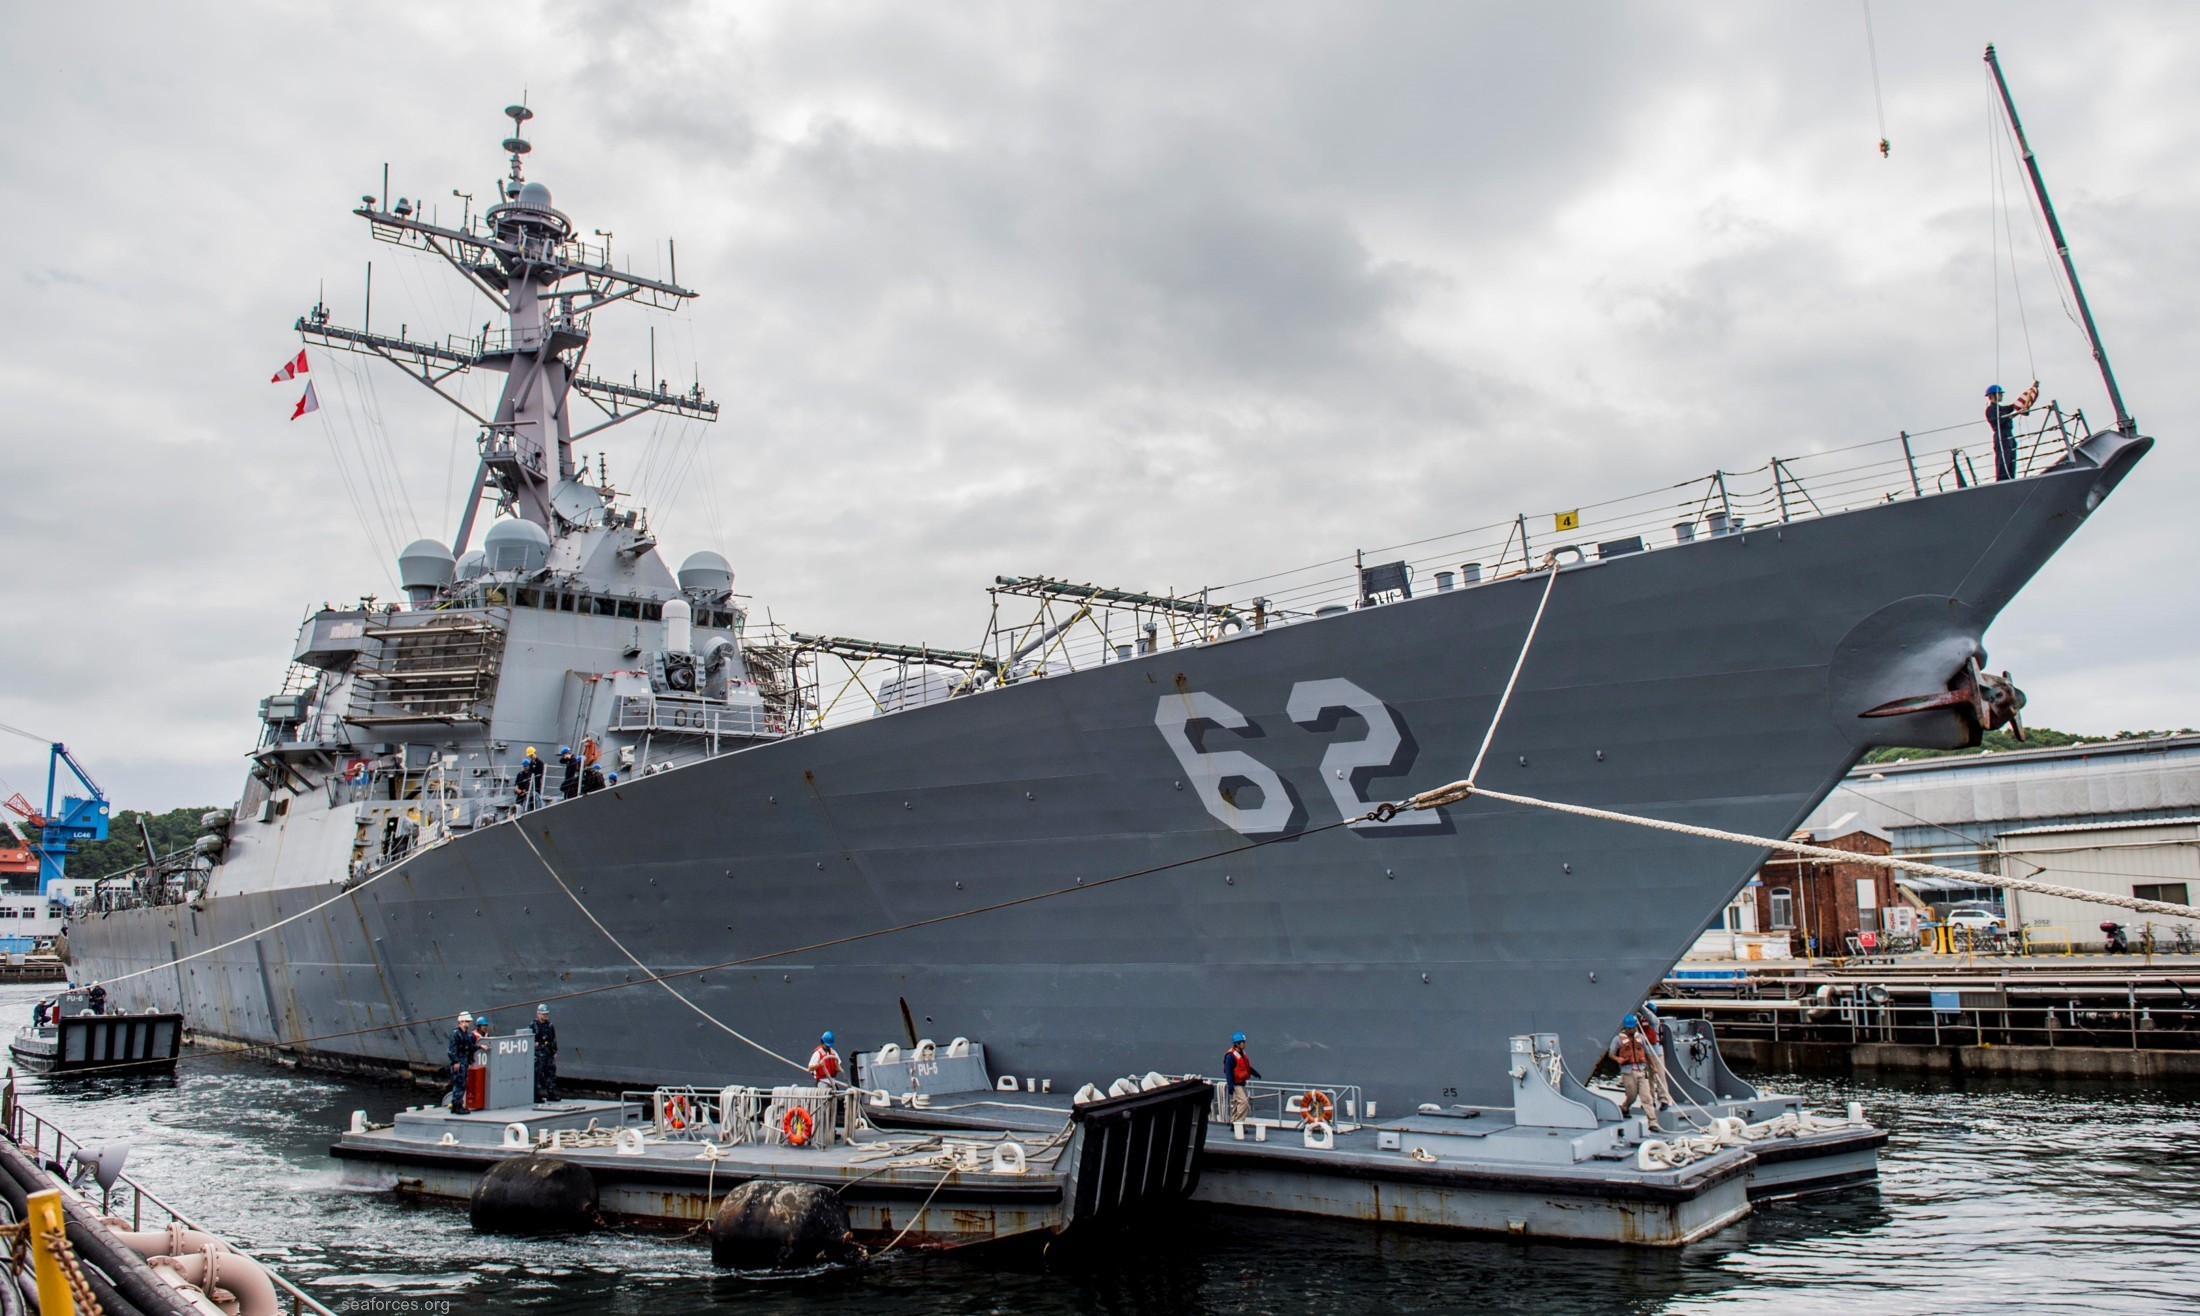 ddg-62 uss fitzgerald guided missile destroyer 2016 15 ship repair facility japan regional maintenance center